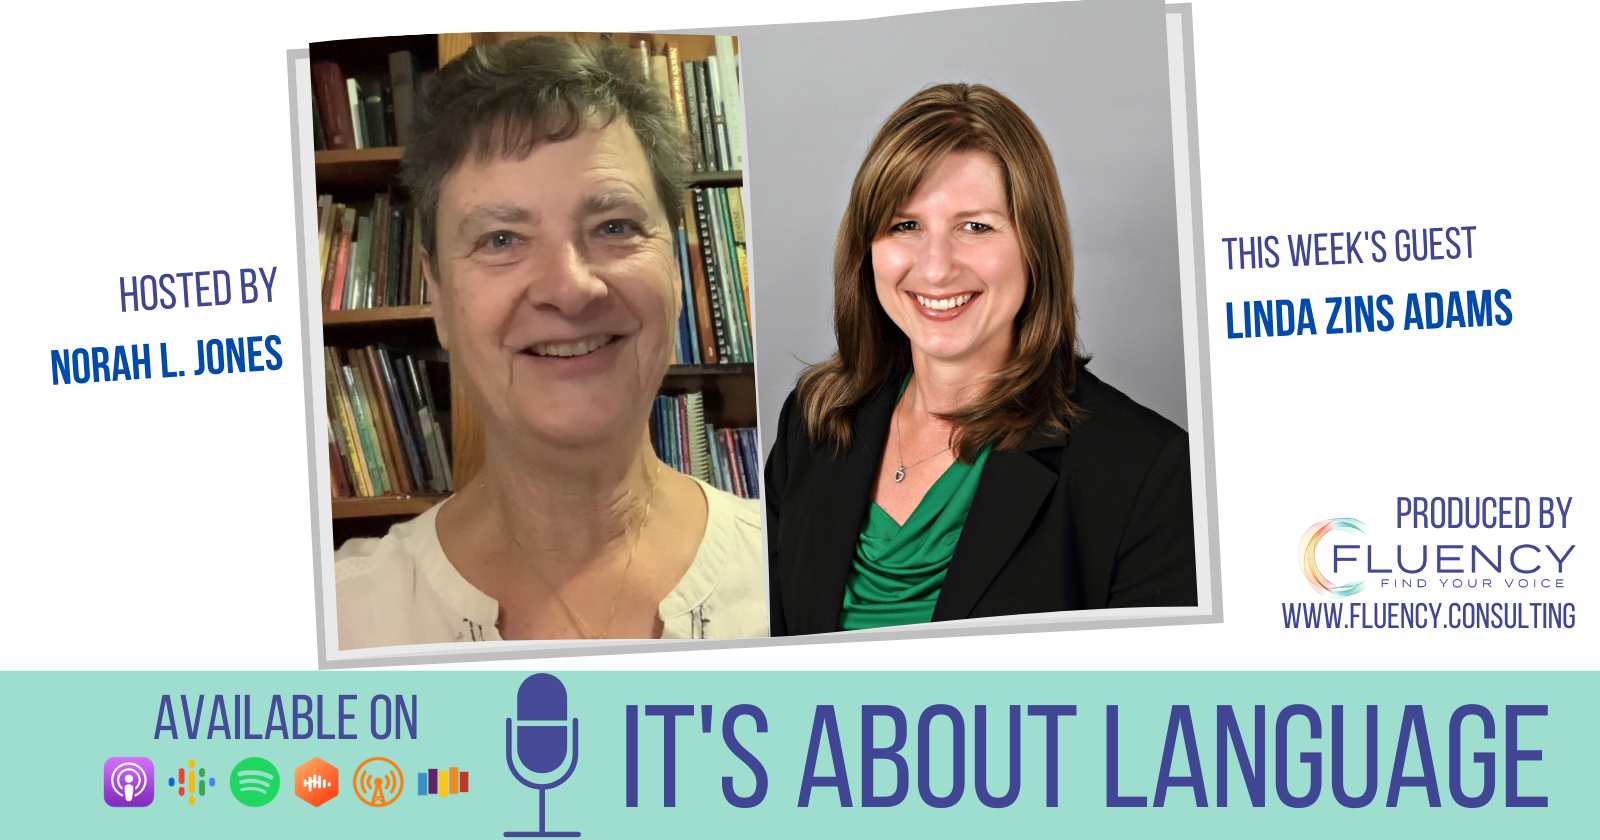 Photos of host Norah L. Jones with guest Linda Zins-Adams. Text around images: Hosted by Norah L. Jones. This week's guest Linda Zins-Adams. Produced by Fluency Consulting. Available on various podcast hosting site icons. In big text at bottom: It's About Language